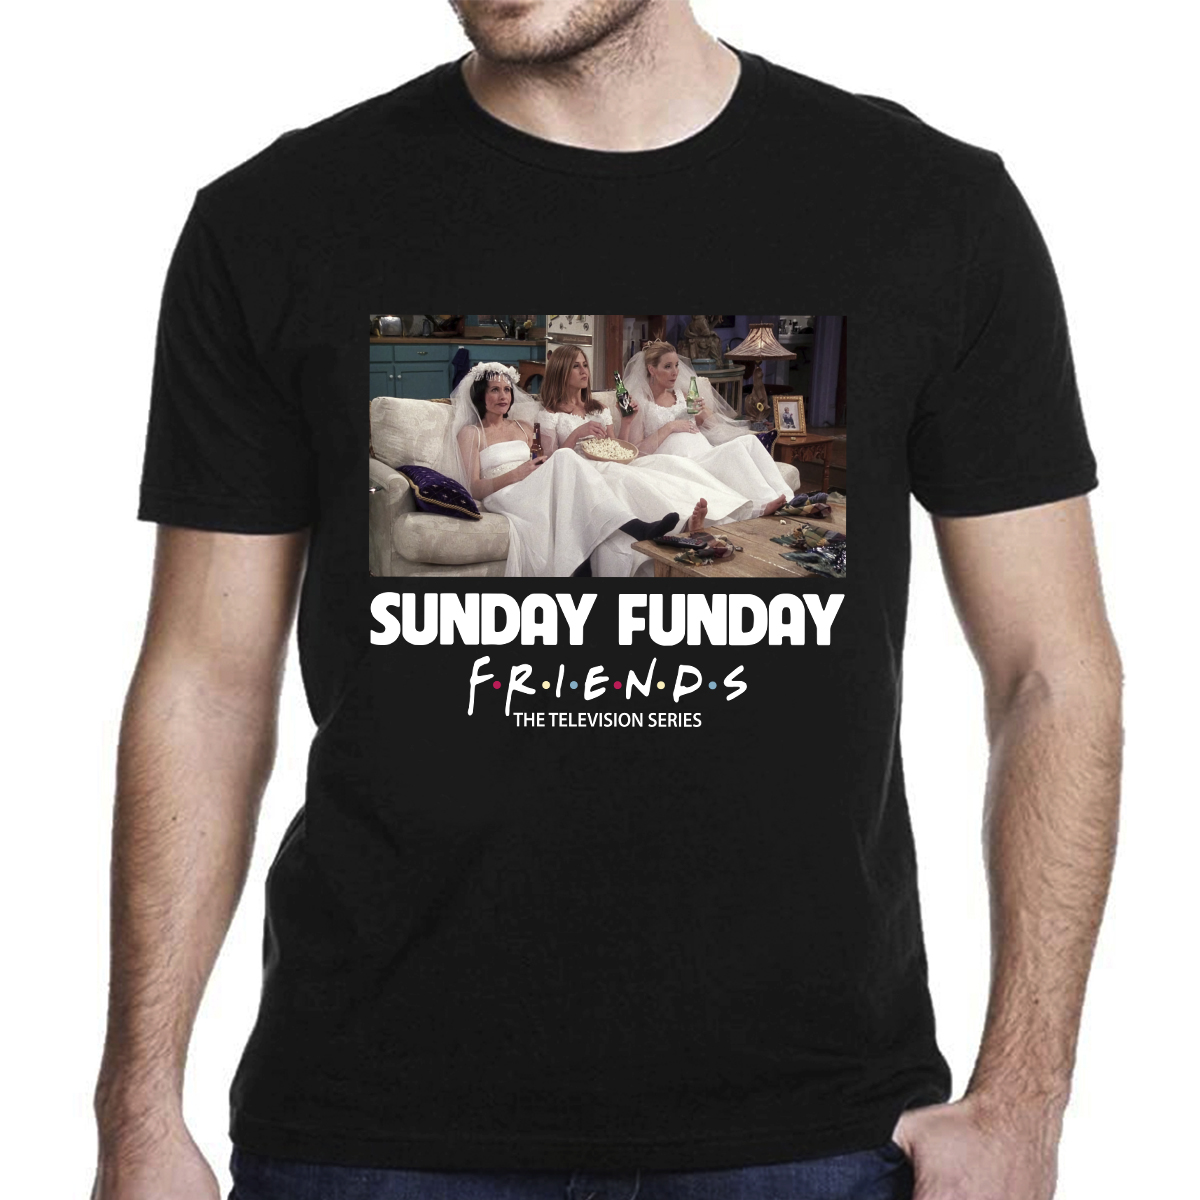 Sunday funday friends the television series shirt